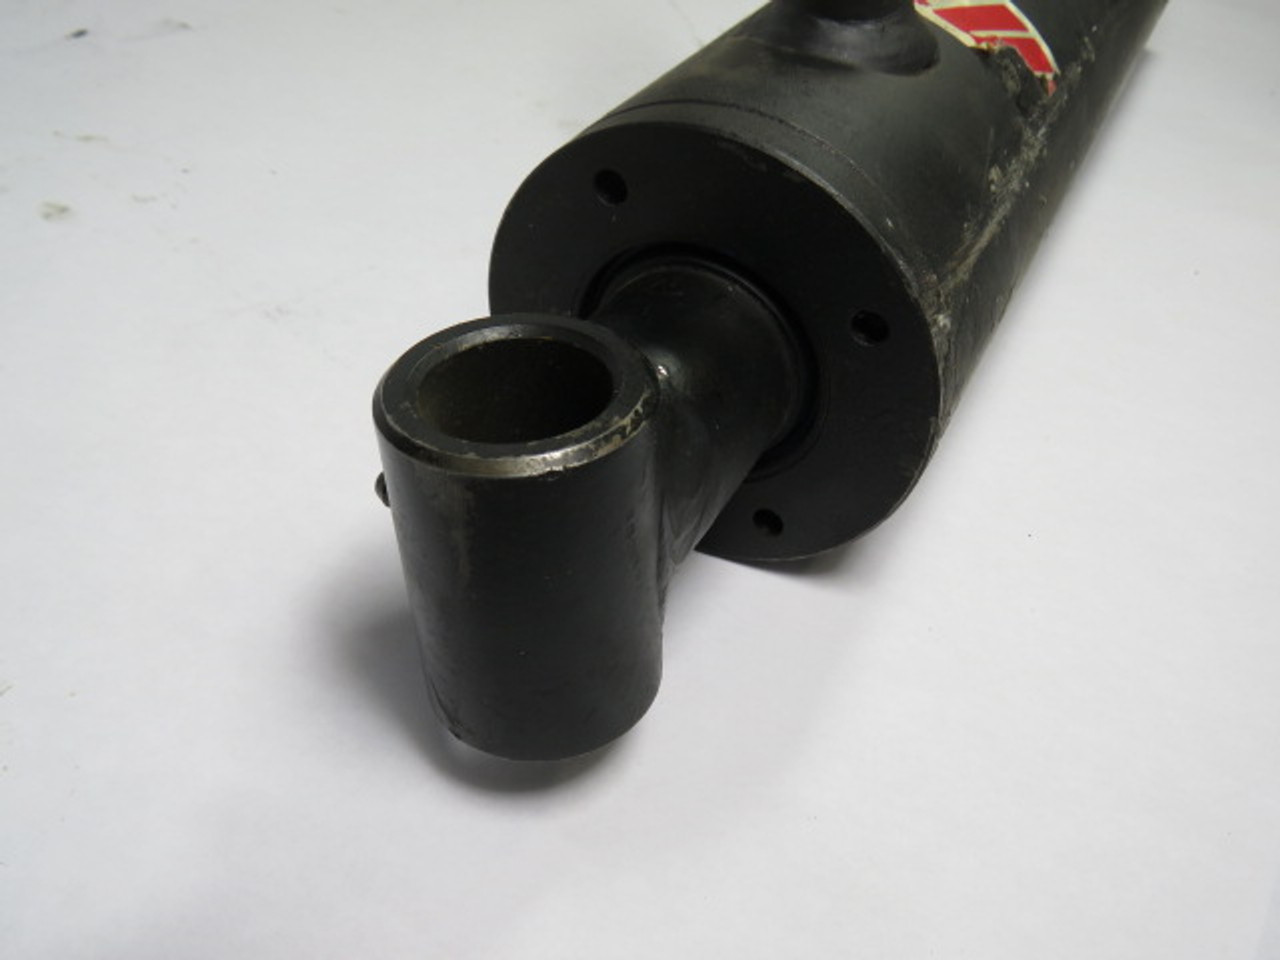 Generic Welded Hydraulic Cylinder 1-1/2" Bore 12" Shaft 3-1/2" Wide USED